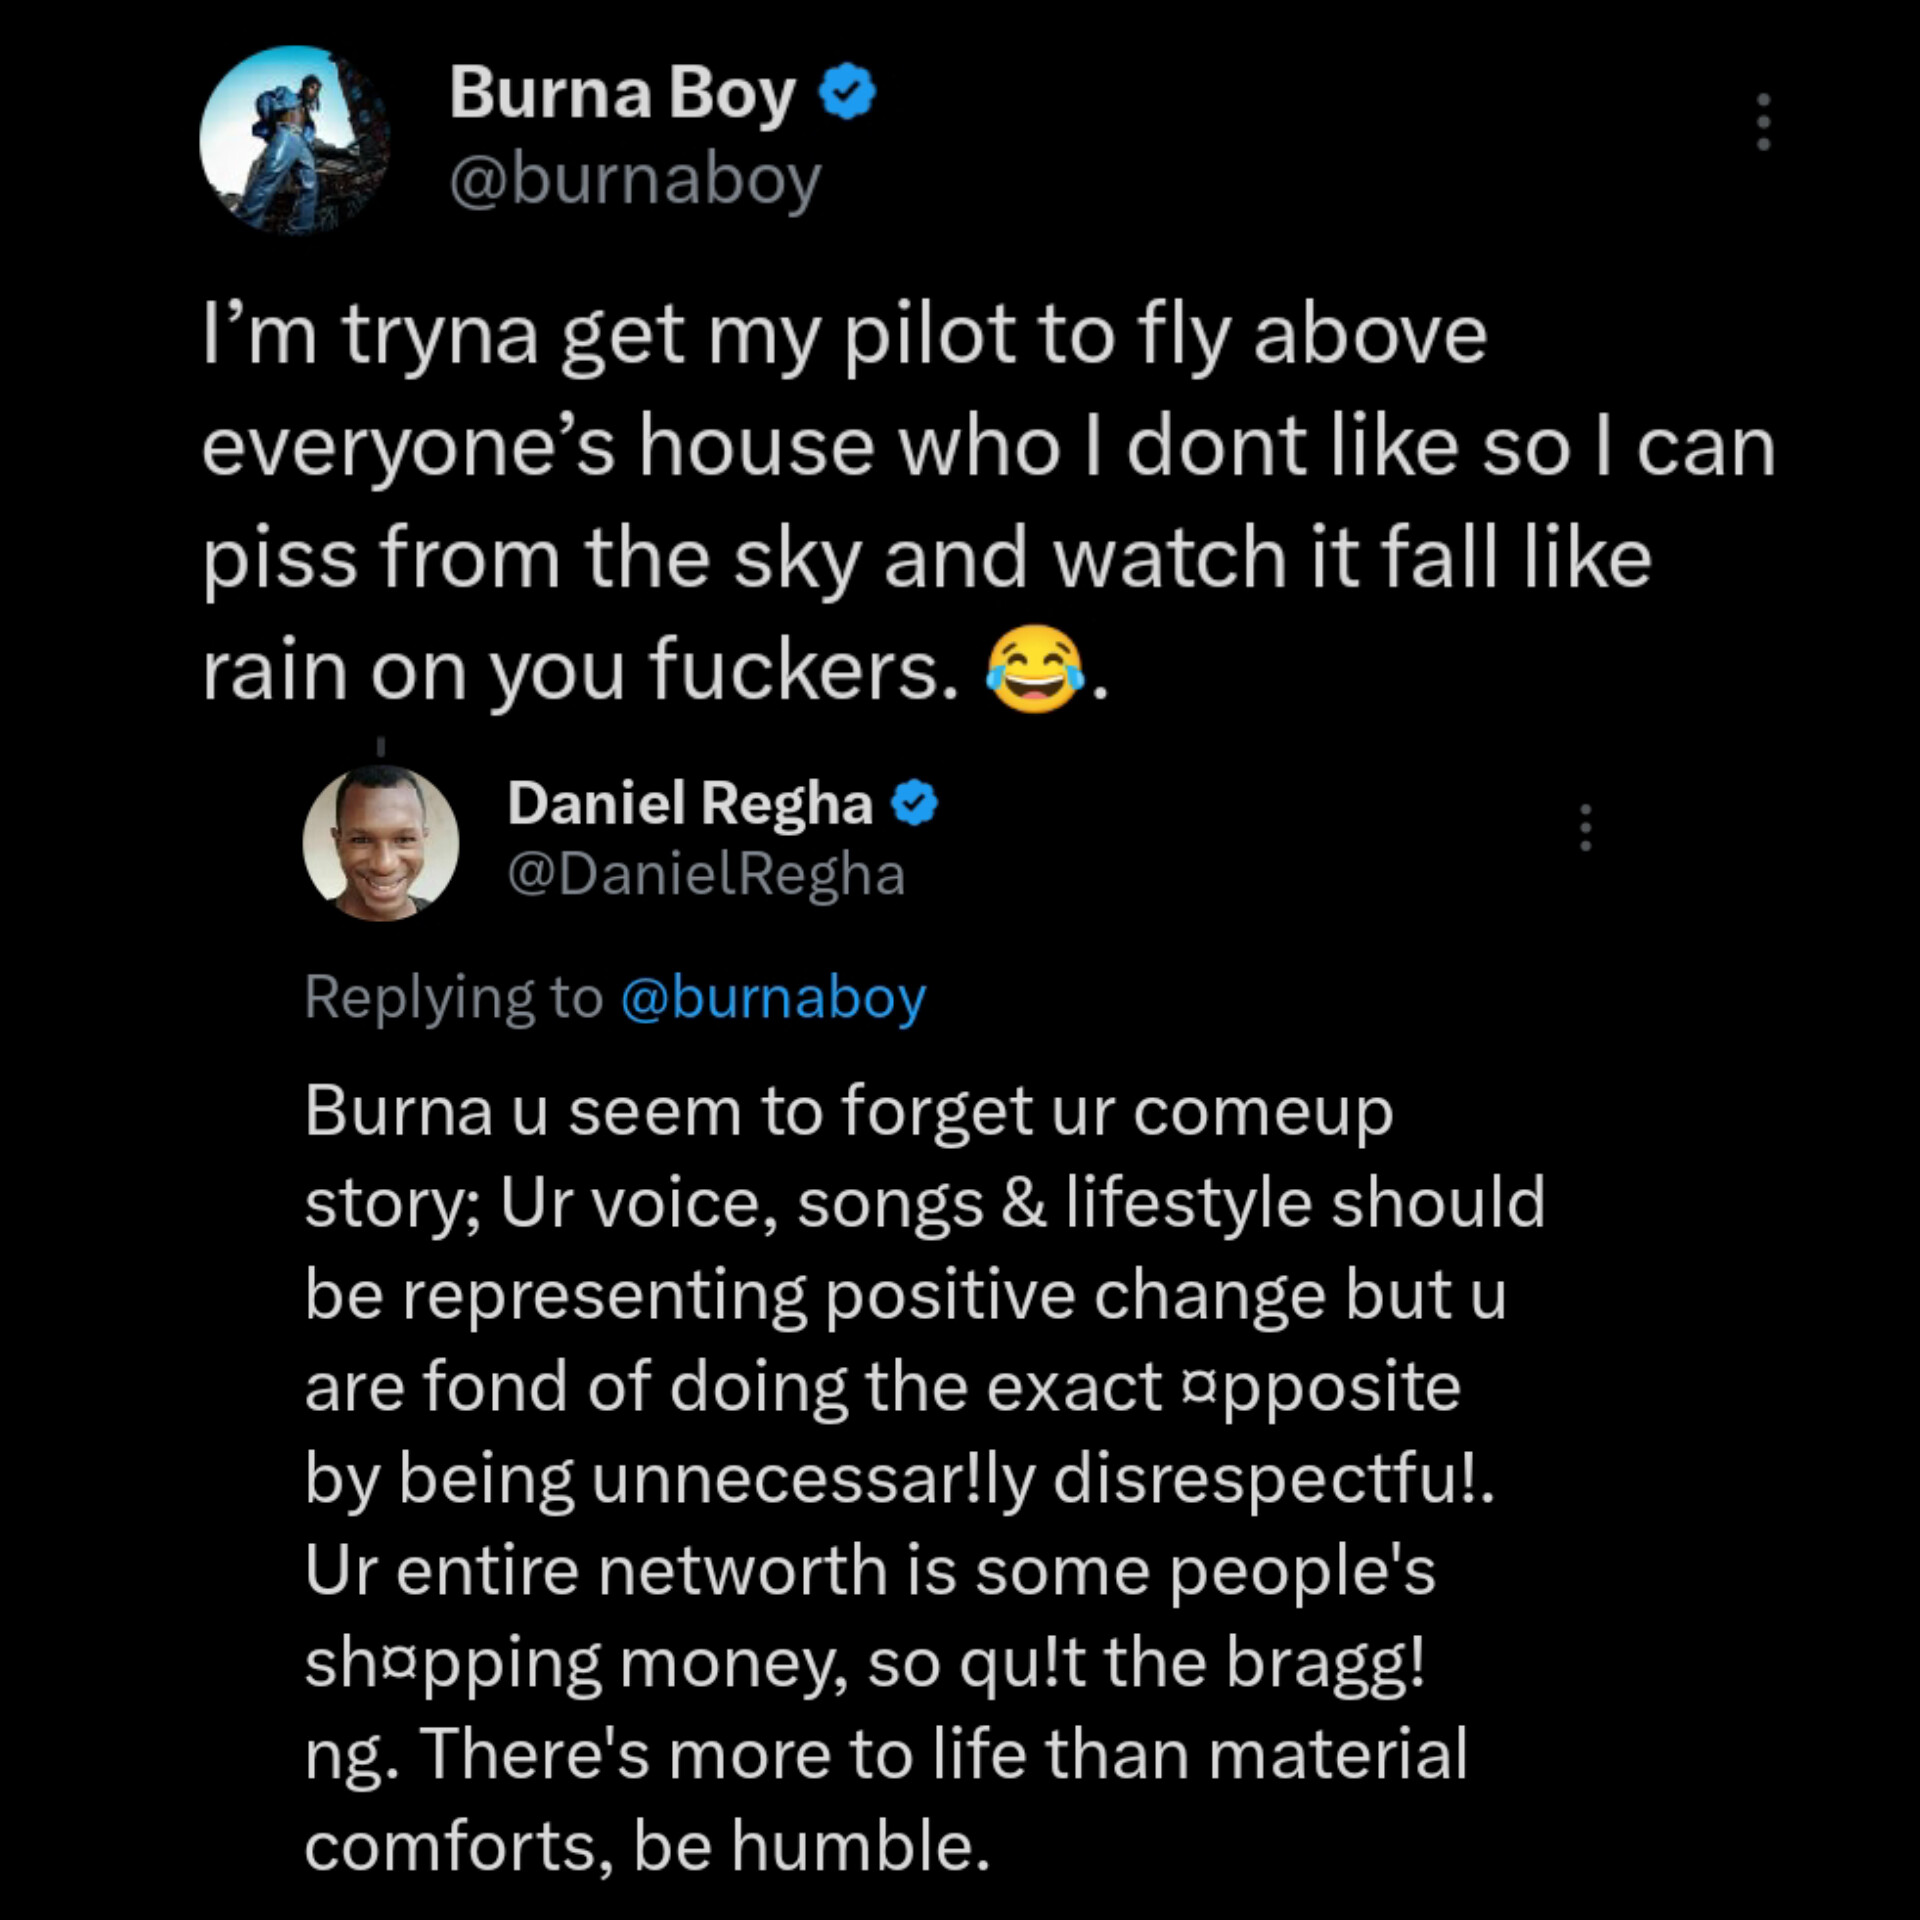 “Your entire net worth is some people’s shopping money” Daniel Regha slams Burna Boy over his bragging